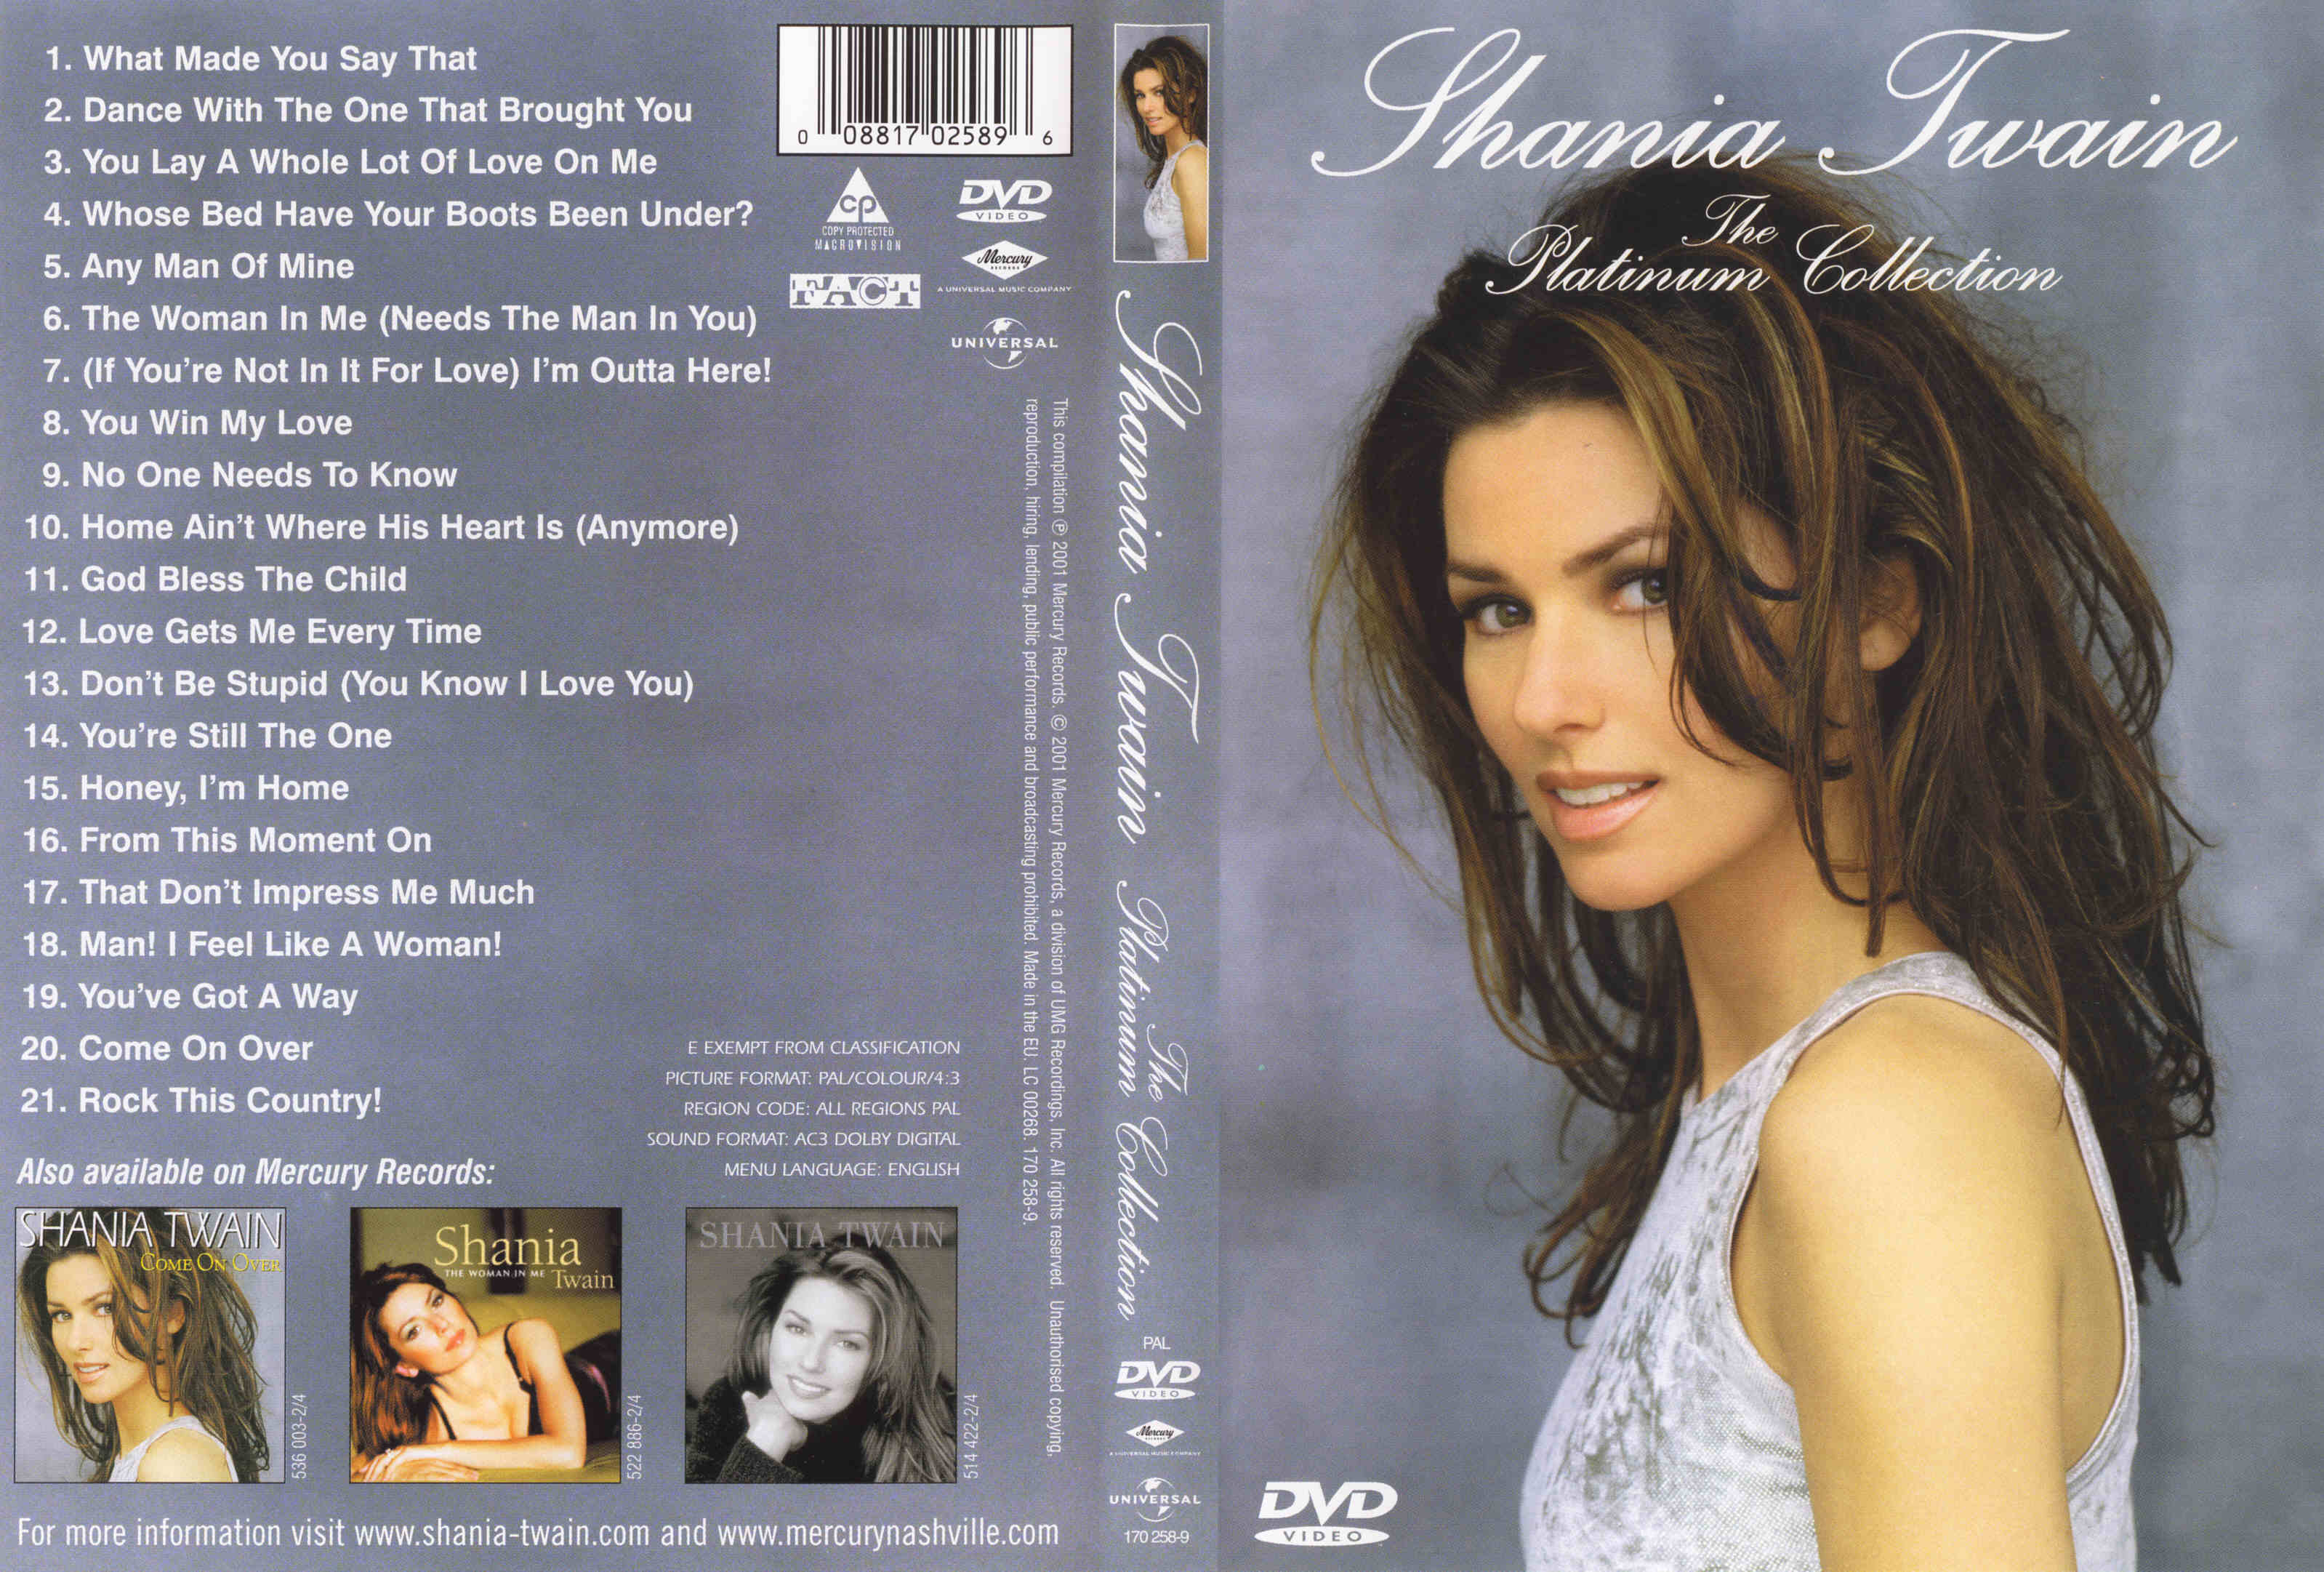 Jaquette DVD Shania Twain The Platinium Collection